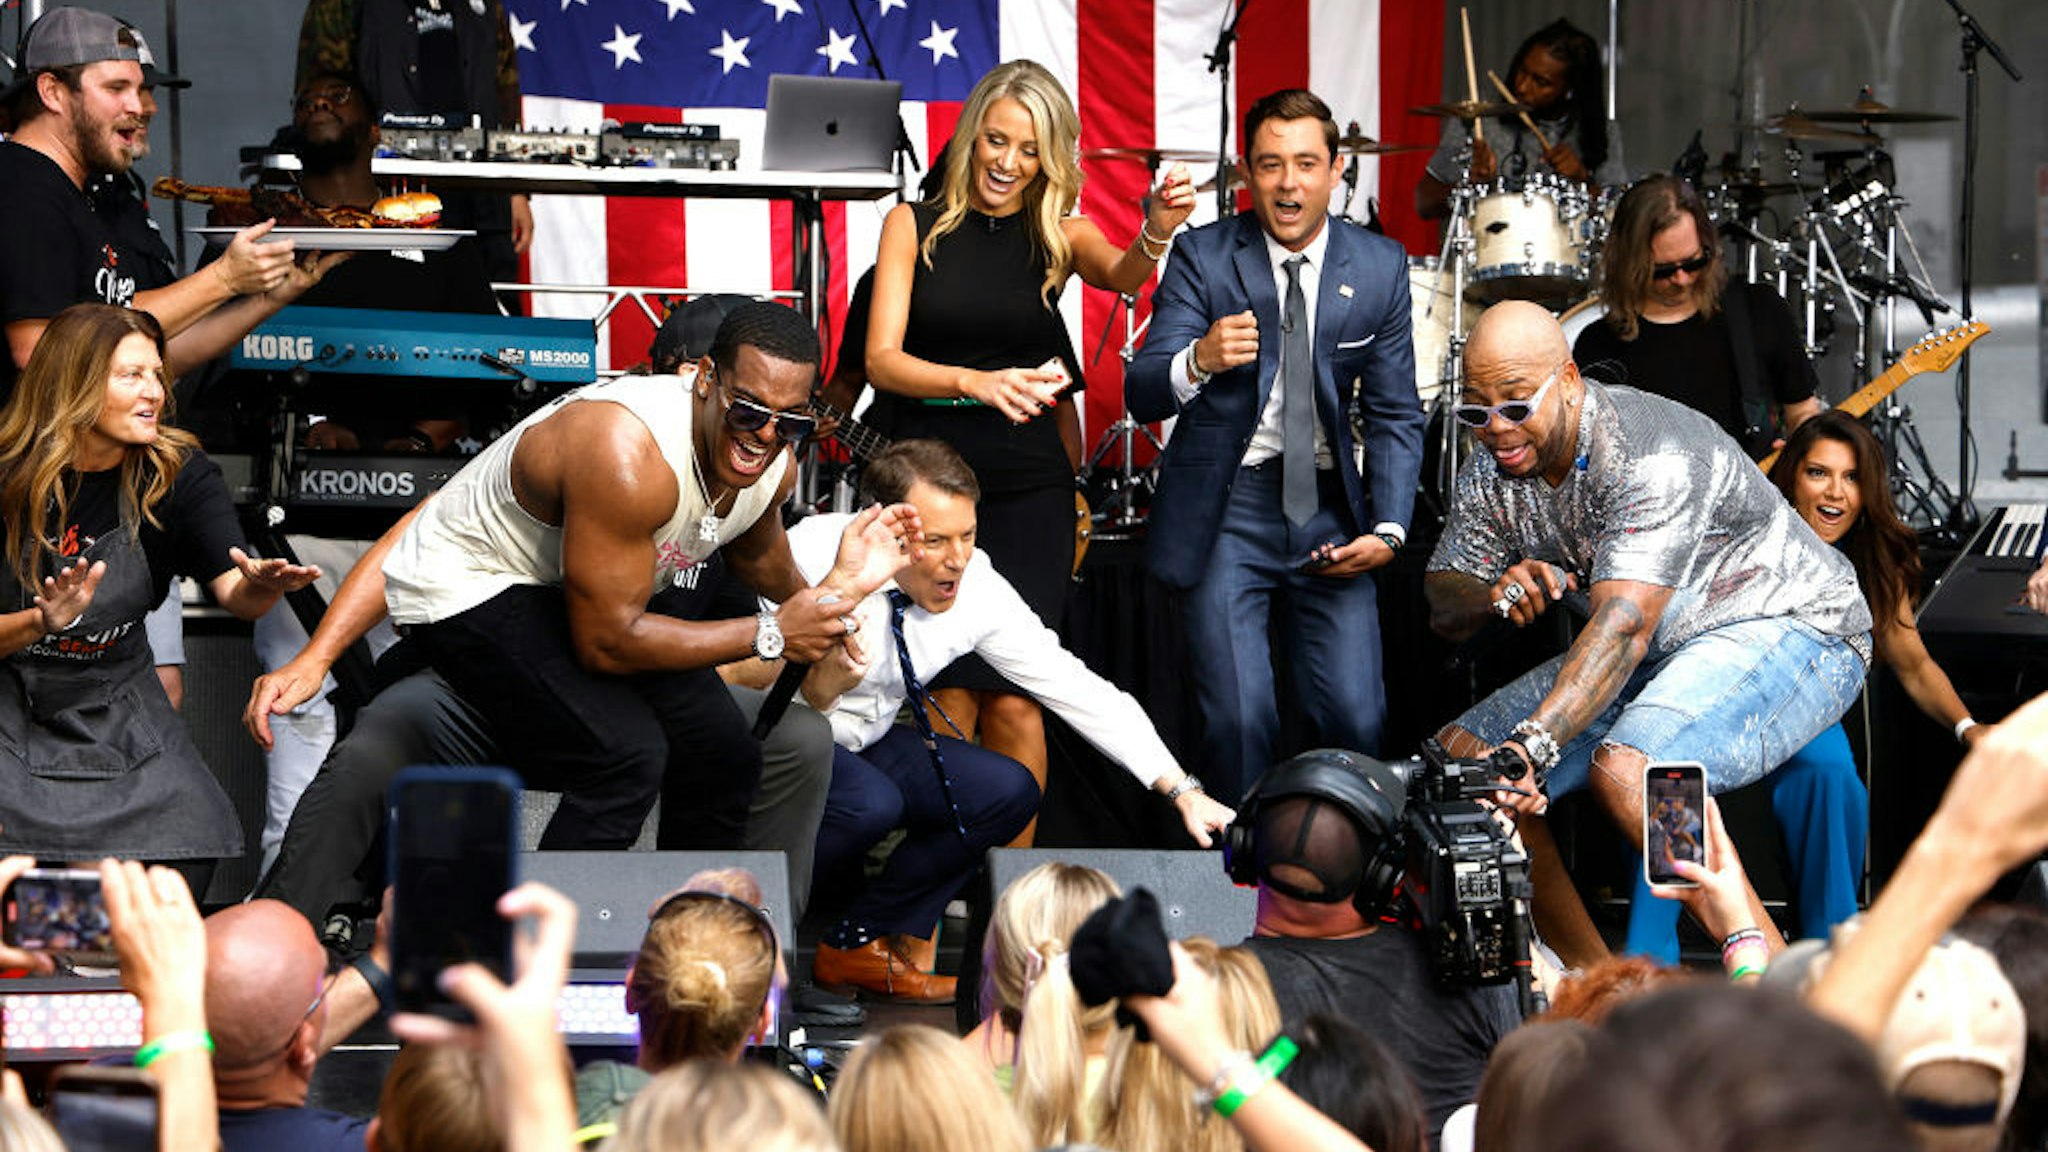 NEW YORK, NEW YORK - JULY 08: Int'l Nephew, Todd Piro, Carley Shimkus, Adam Klotz and Flo Rida perform on "FOX &amp; Friends" All American Summer Concert Series at FOX Studios on July 08, 2022 in New York City. (Photo by John Lamparski/Getty Images)